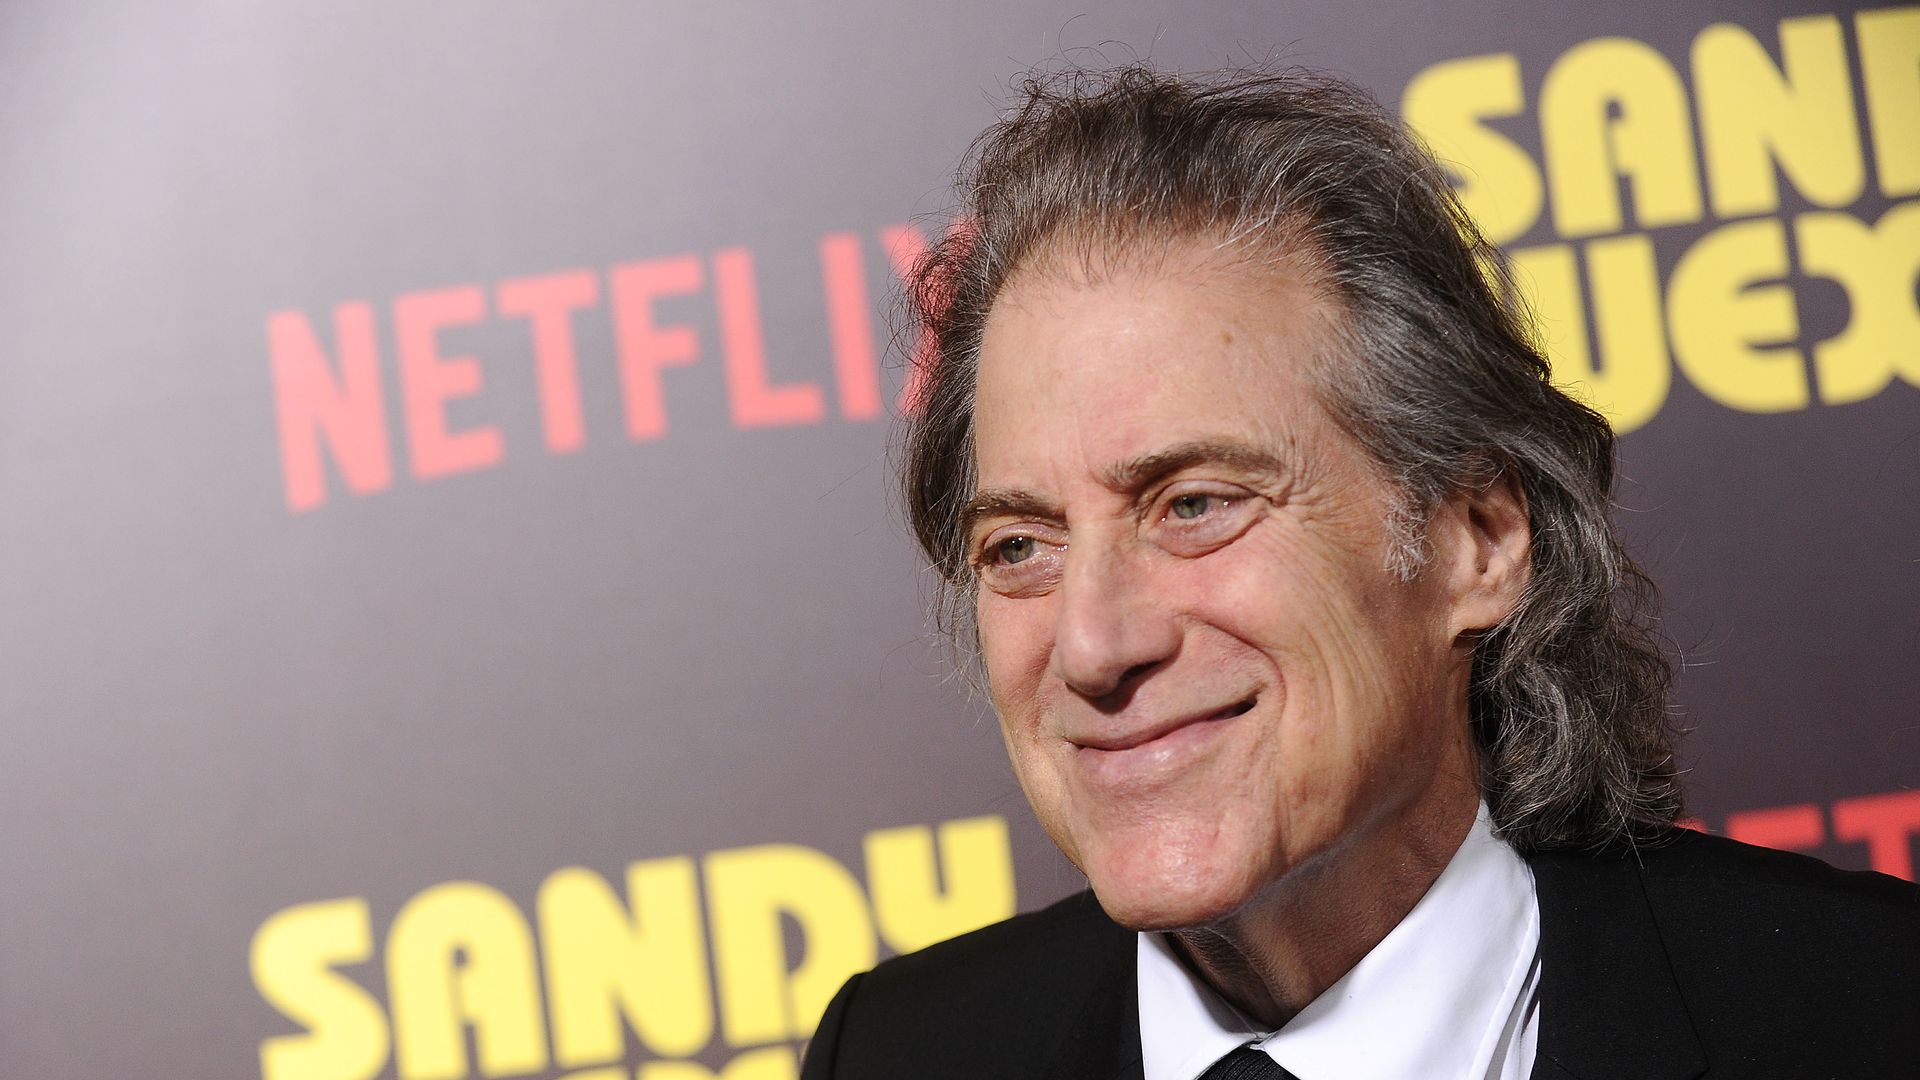 Richard Lewis attends the premiere of "Sandy Wexler" at ArcLight Cinemas Cinerama Dome on April 6, 2017 in Hollywood, California